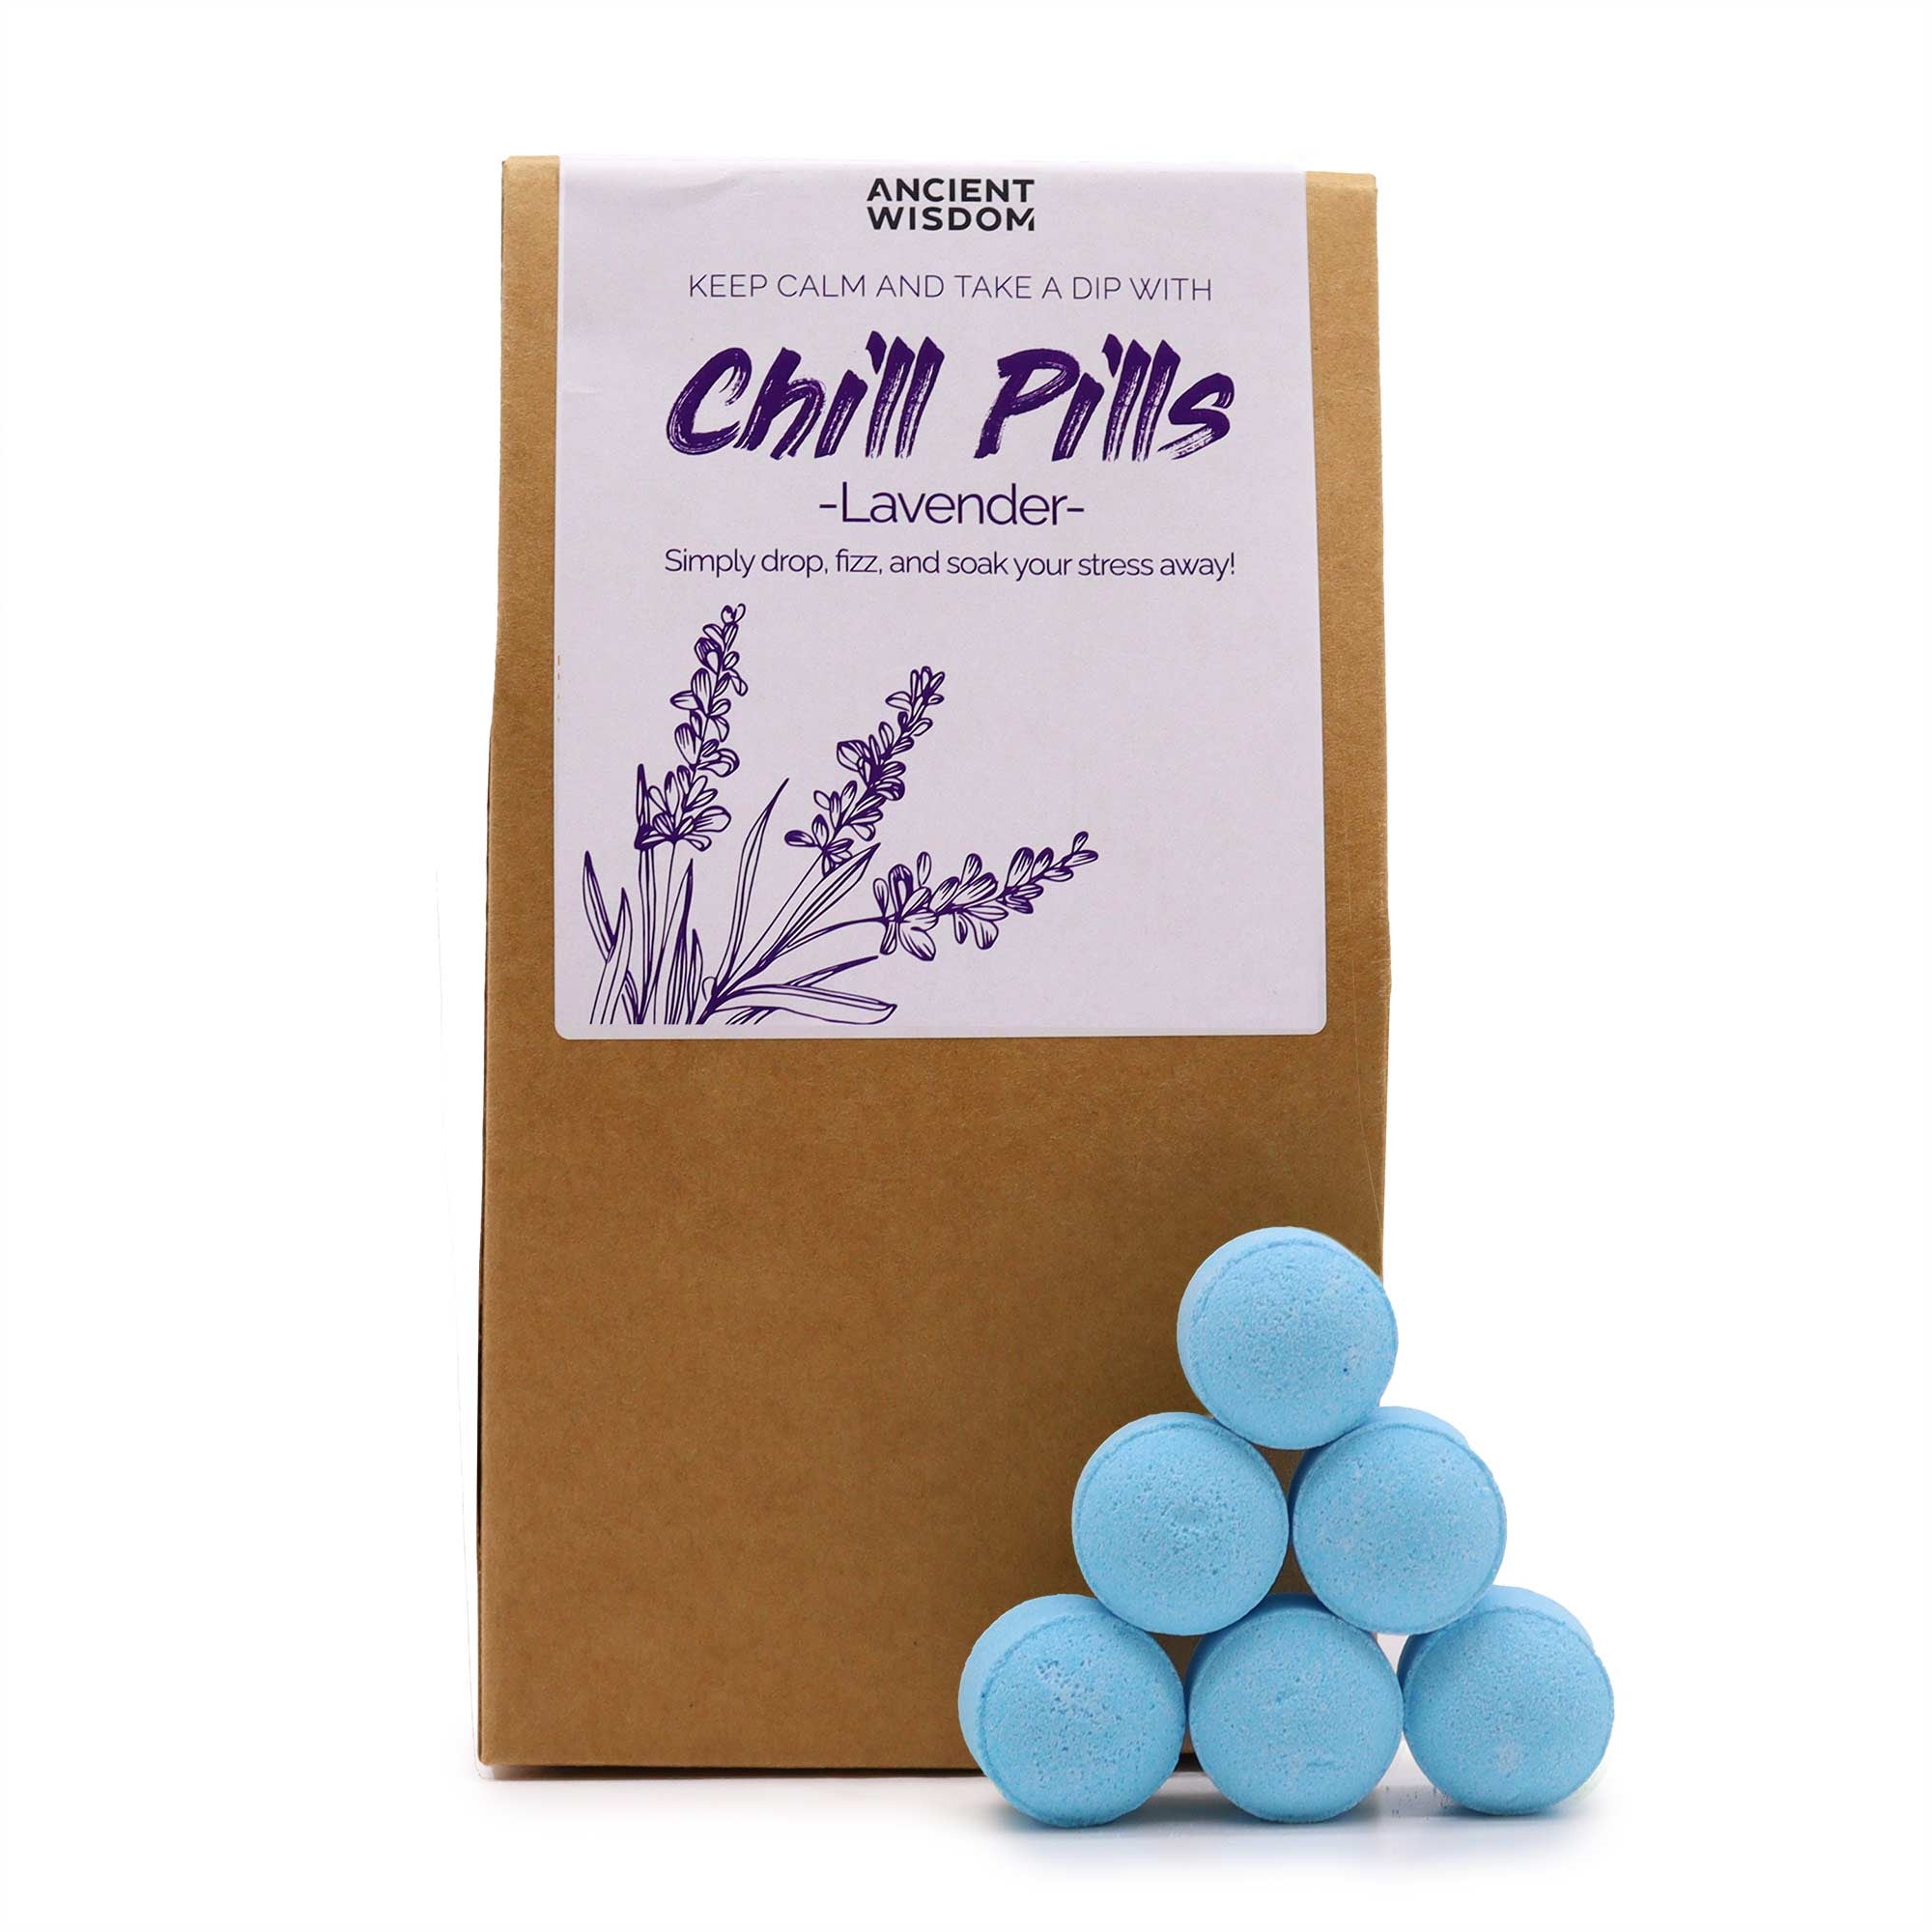 View Chill Pills Gift Pack 350g Lavender information